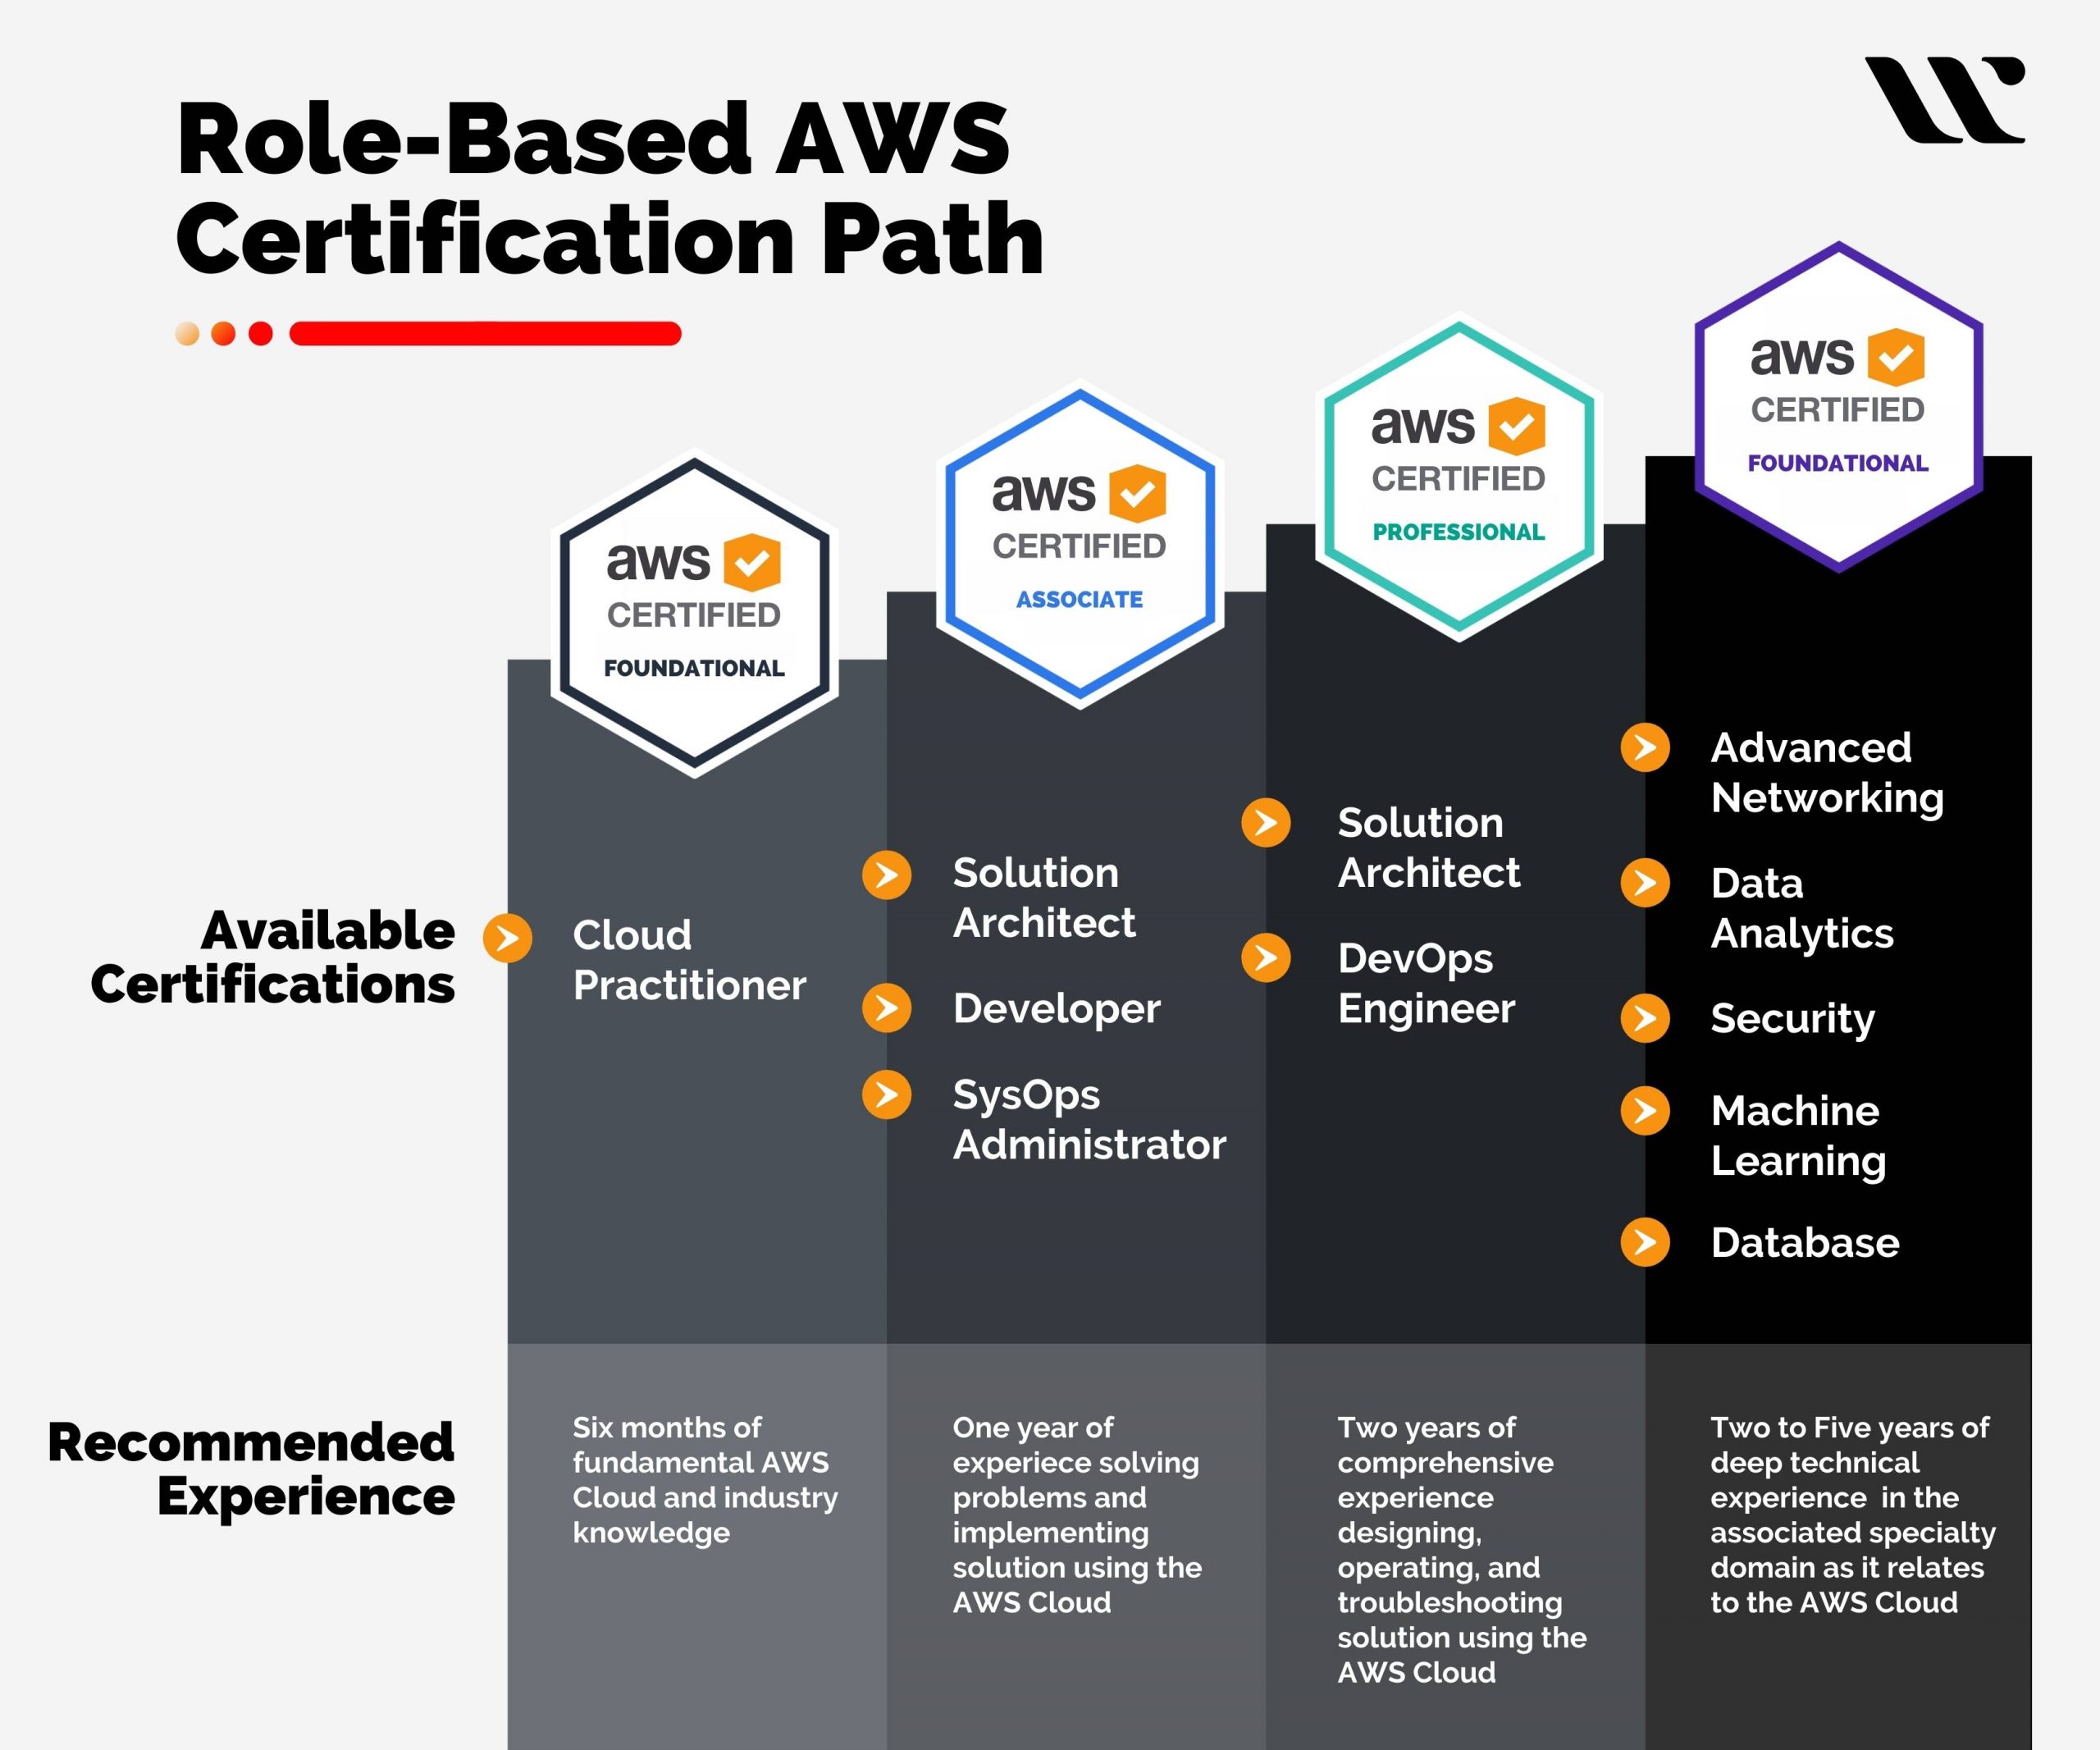 My Guide To AWS The Guide To Get You There By Chris 50% OFF